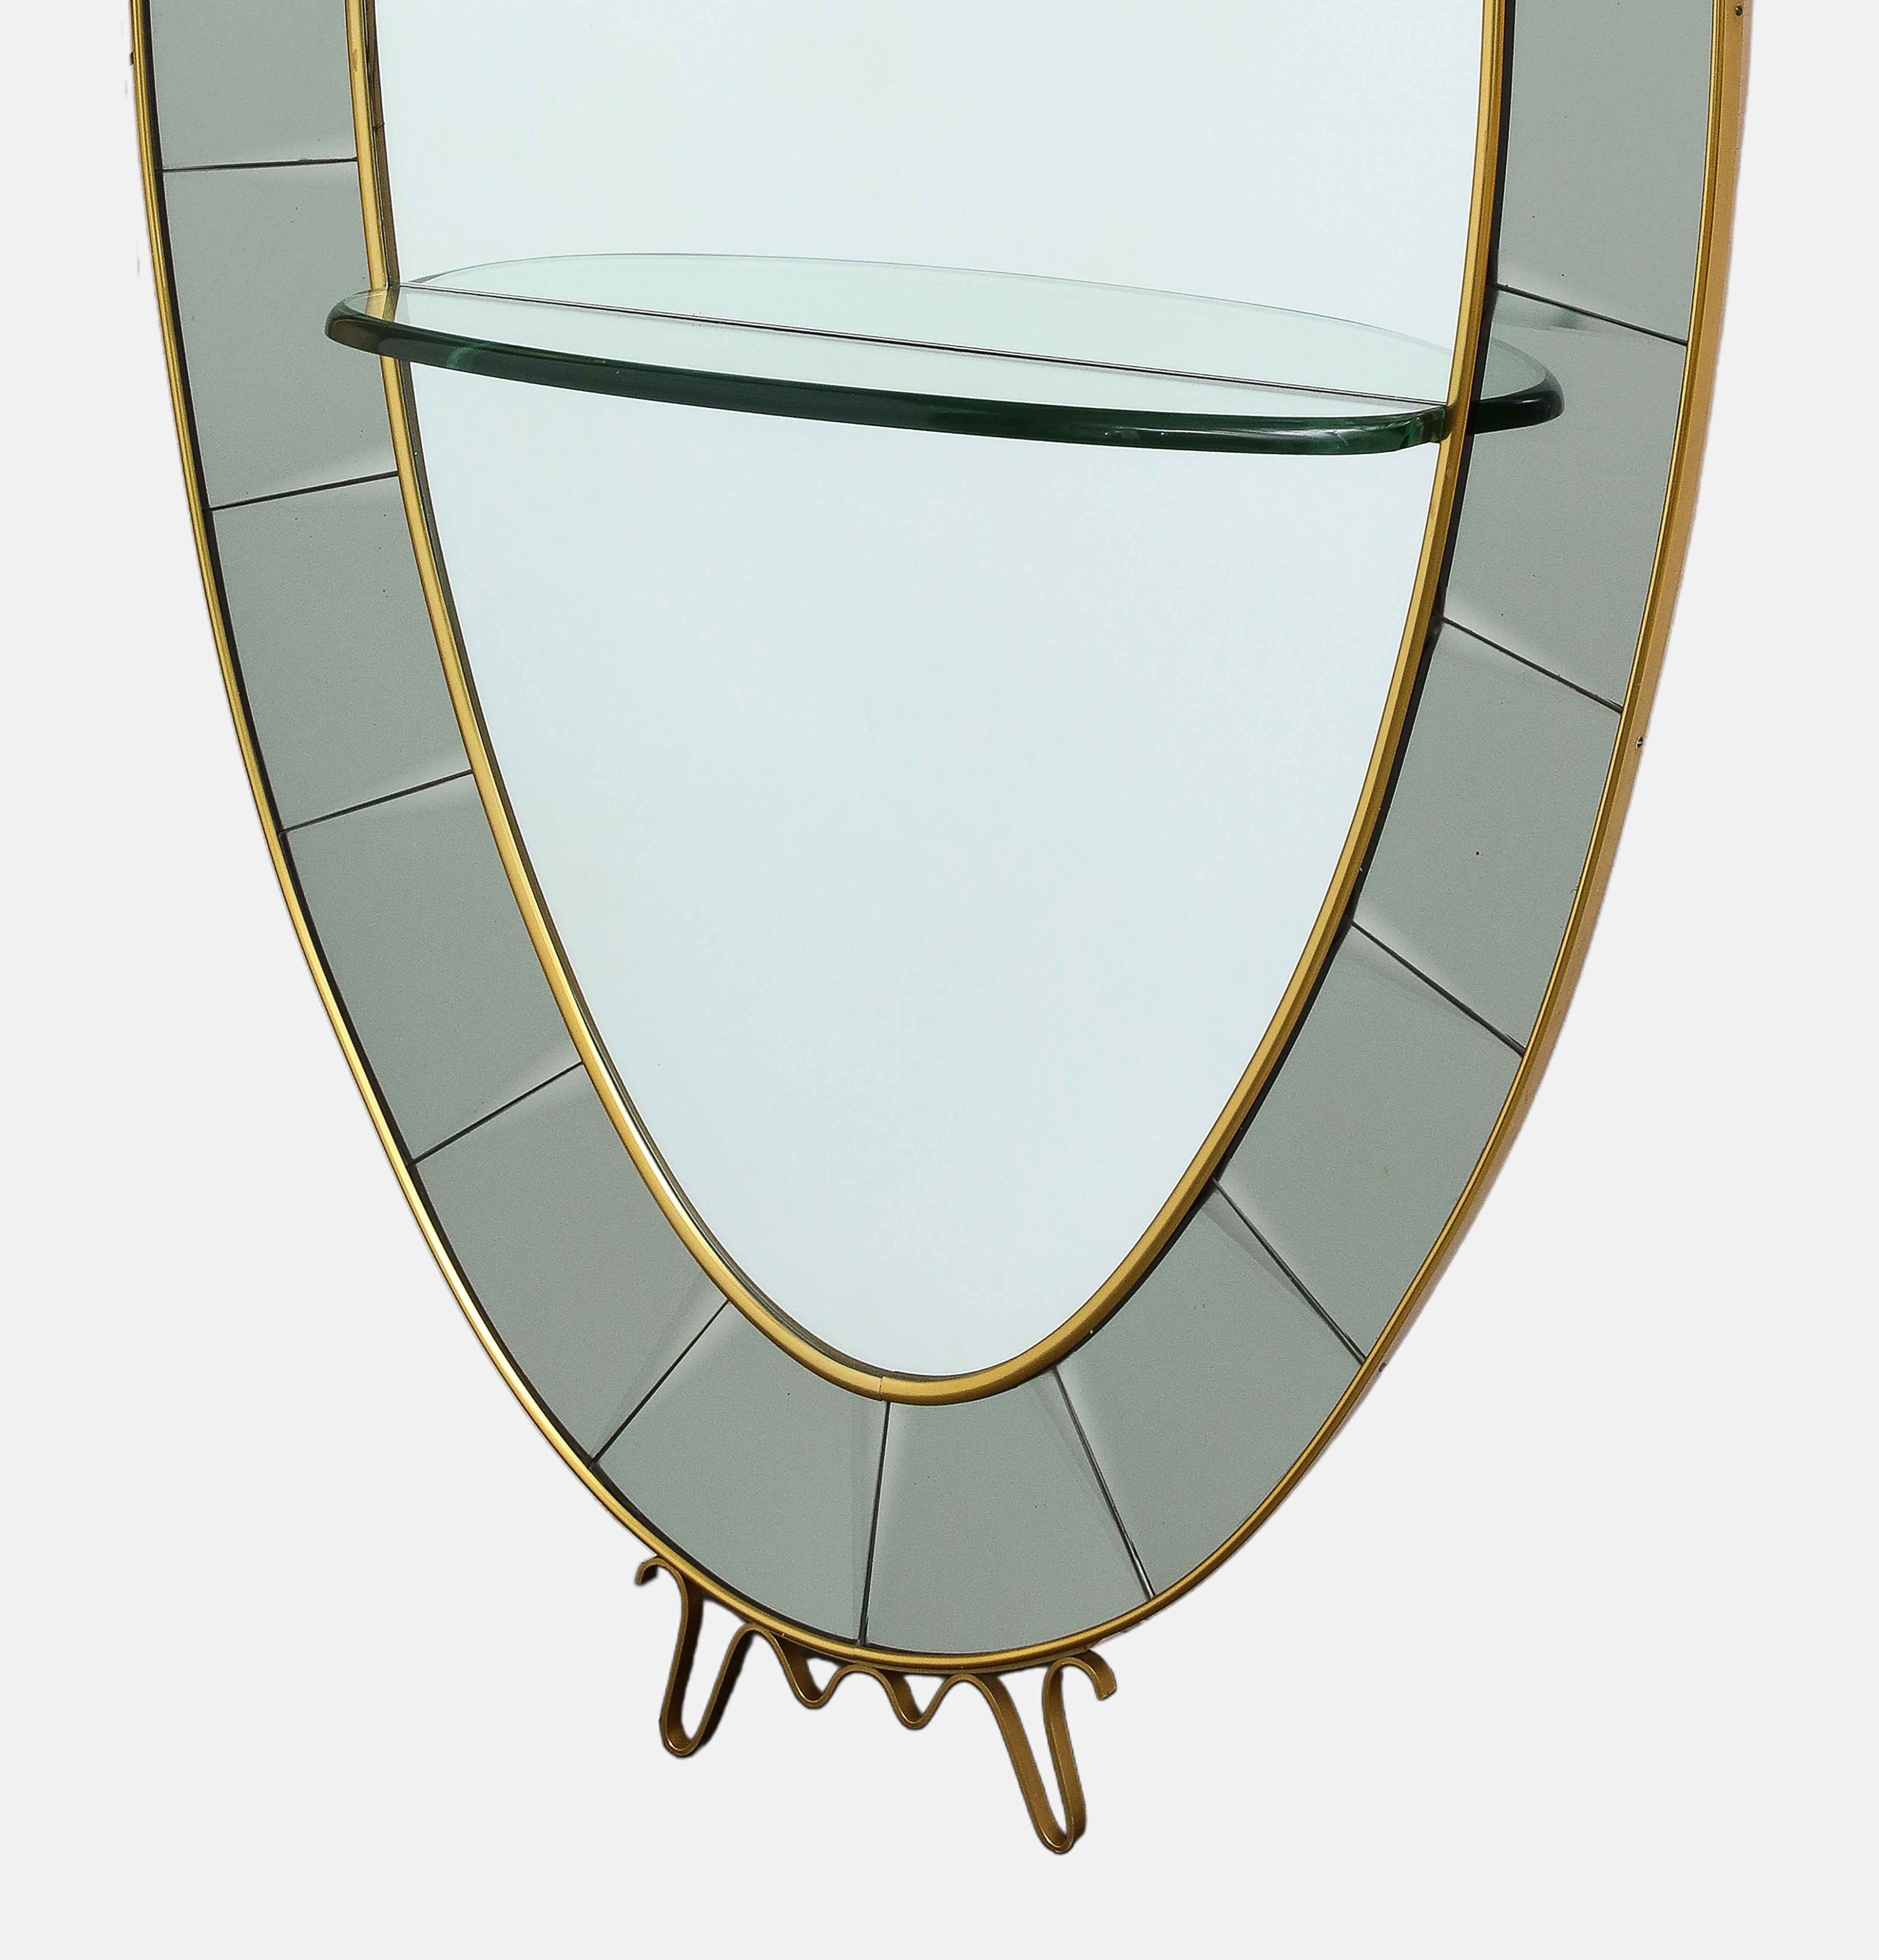 Gilt Cristal Art Grand Scale Oval Hand-Cut Beveled Crystal Floor Mirror with Shelf For Sale